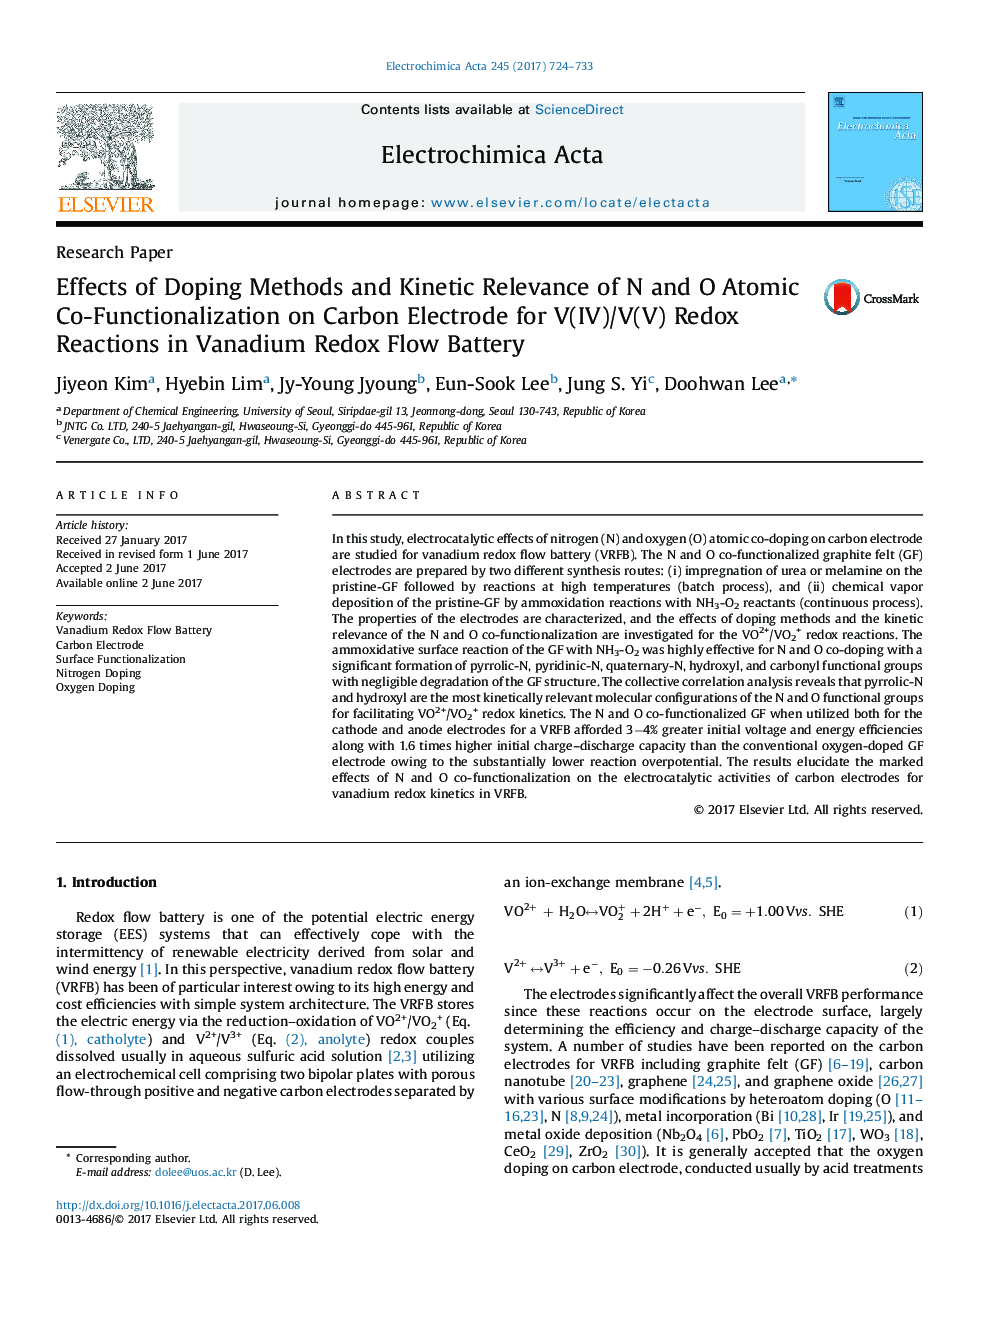 Effects of Doping Methods and Kinetic Relevance of N and O Atomic Co-Functionalization on Carbon Electrode for V(IV)/V(V) Redox Reactions in Vanadium Redox Flow Battery